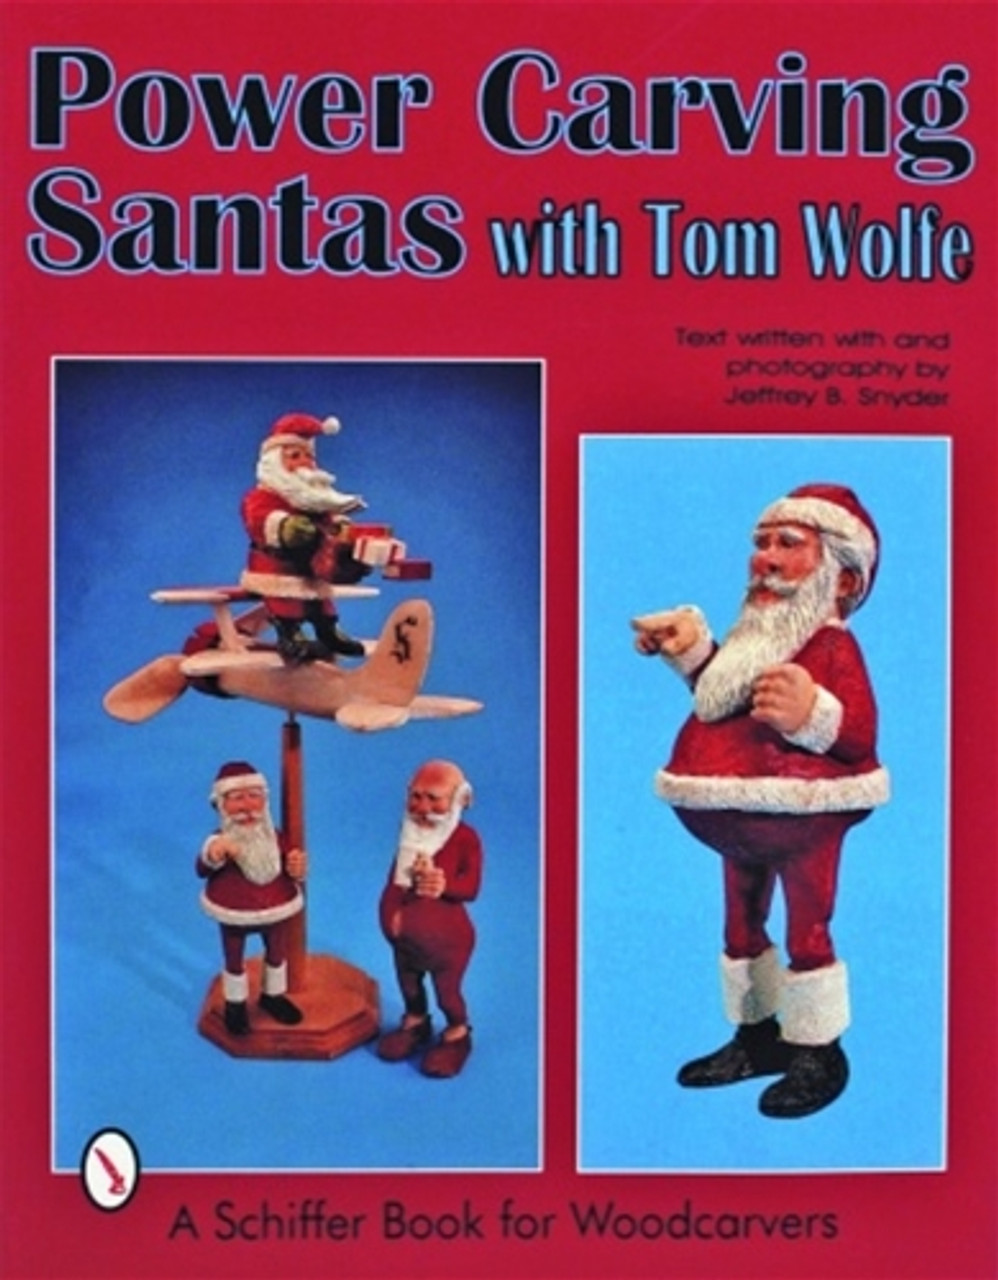 Power Carving Santa's shows you how to use your power tools and which techniques work best. When your finished carving there are painting instructions he'll guide you through to finish your figure that you can be proud of and display it.